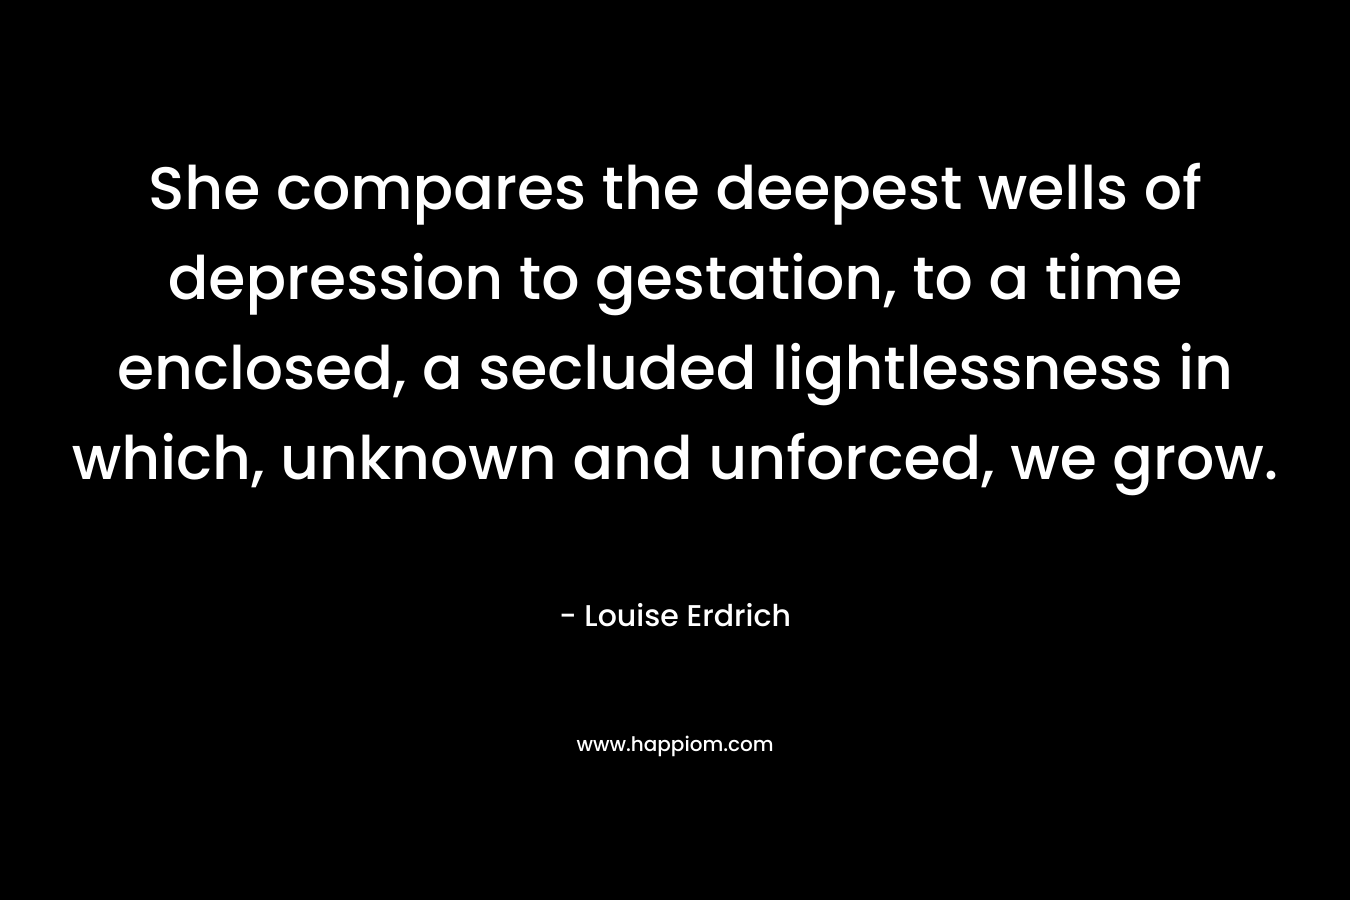 She compares the deepest wells of depression to gestation, to a time enclosed, a secluded lightlessness in which, unknown and unforced, we grow. – Louise Erdrich